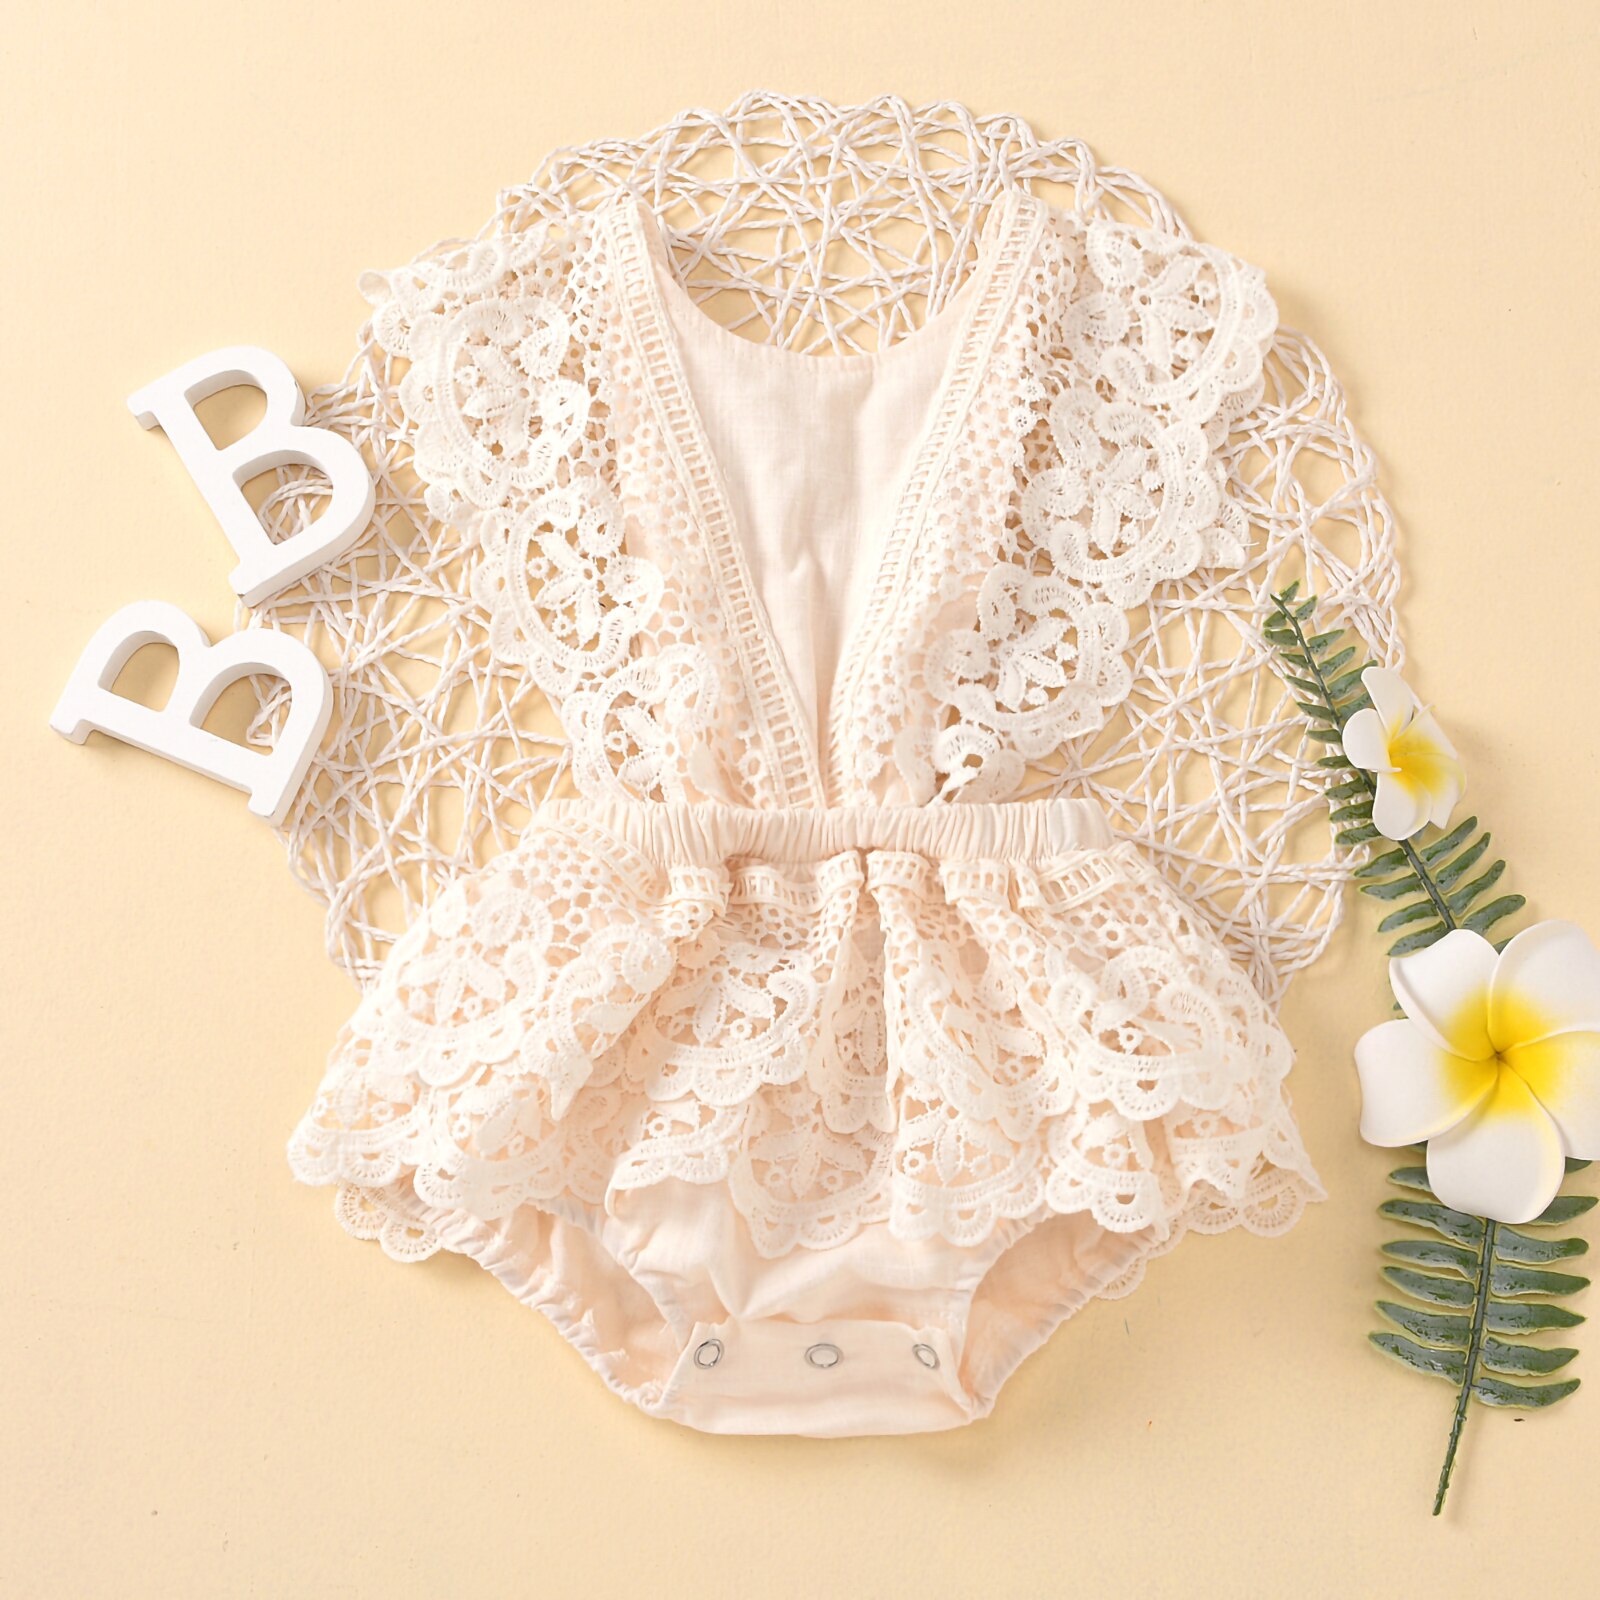 ma-baby-0-24M-Infant-Newborn-Baby-Girl-Romper-Lace-Ruffle-Jumpsuit-Princess-Birthday-Party-Clothing-3